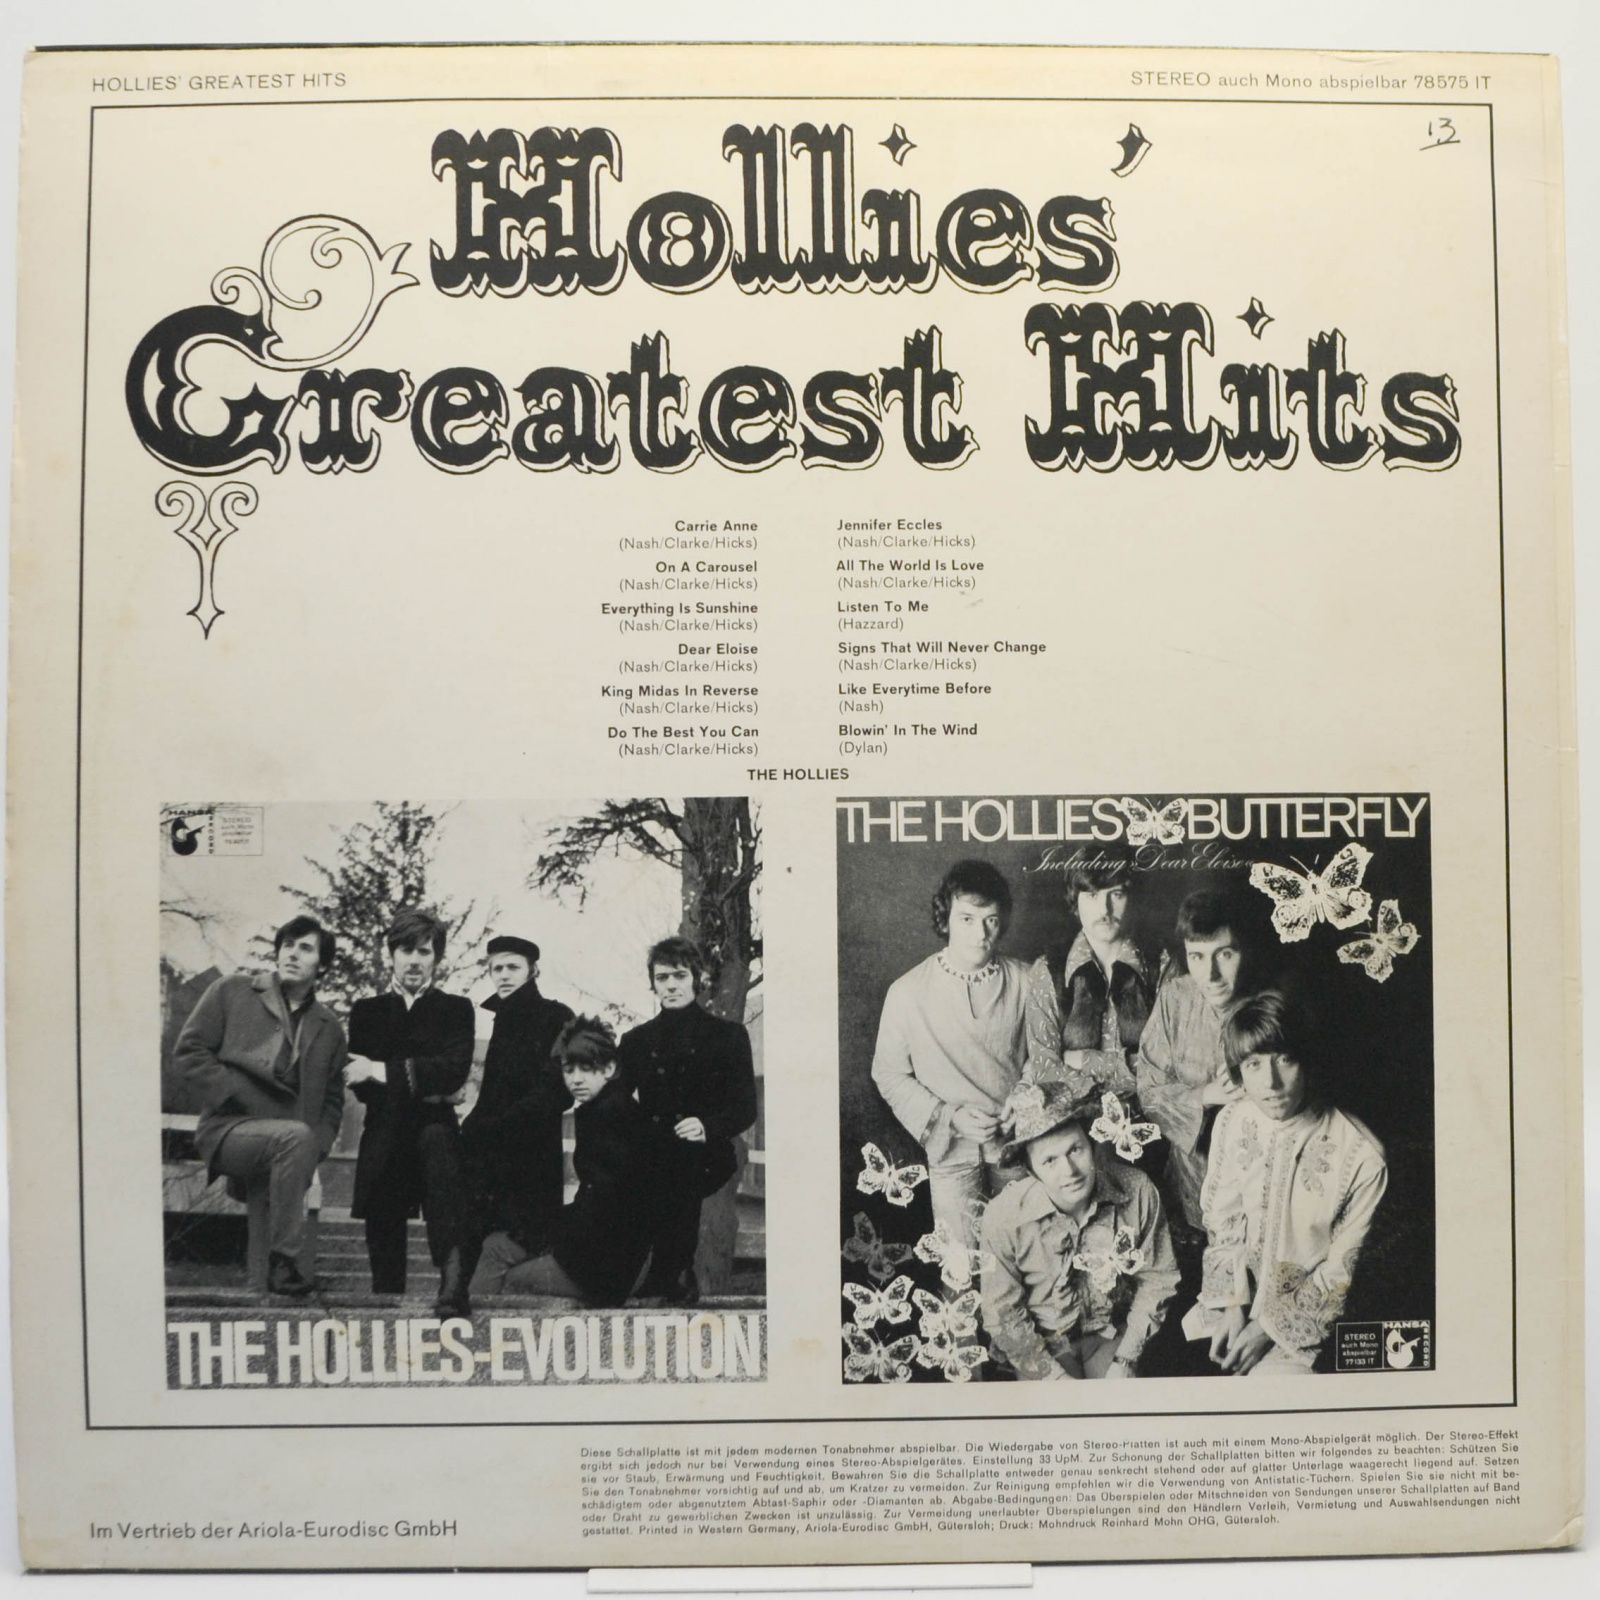 Hollies — Hollies' Greatest Hits, 1968